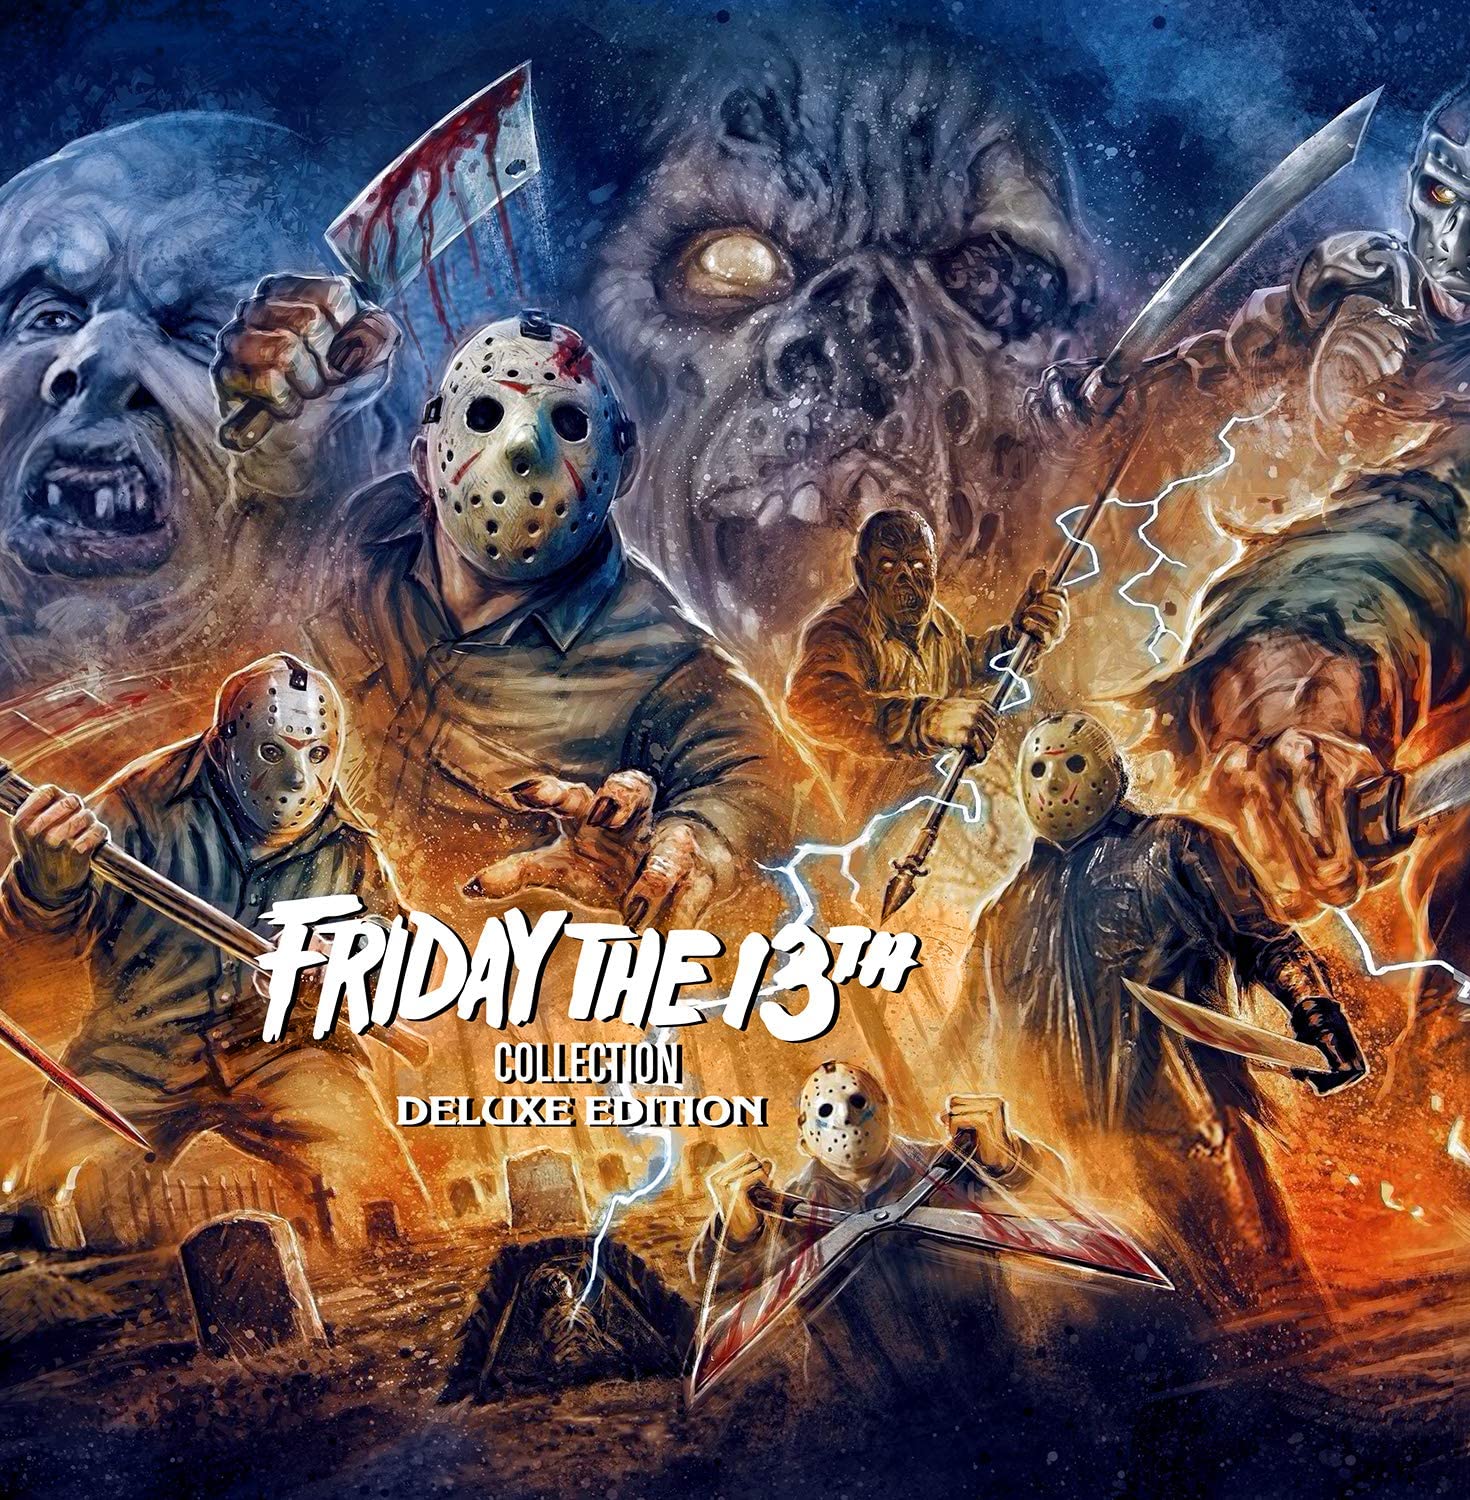 Own the 'Friday The 13th Deluxe Collection' on October 13th